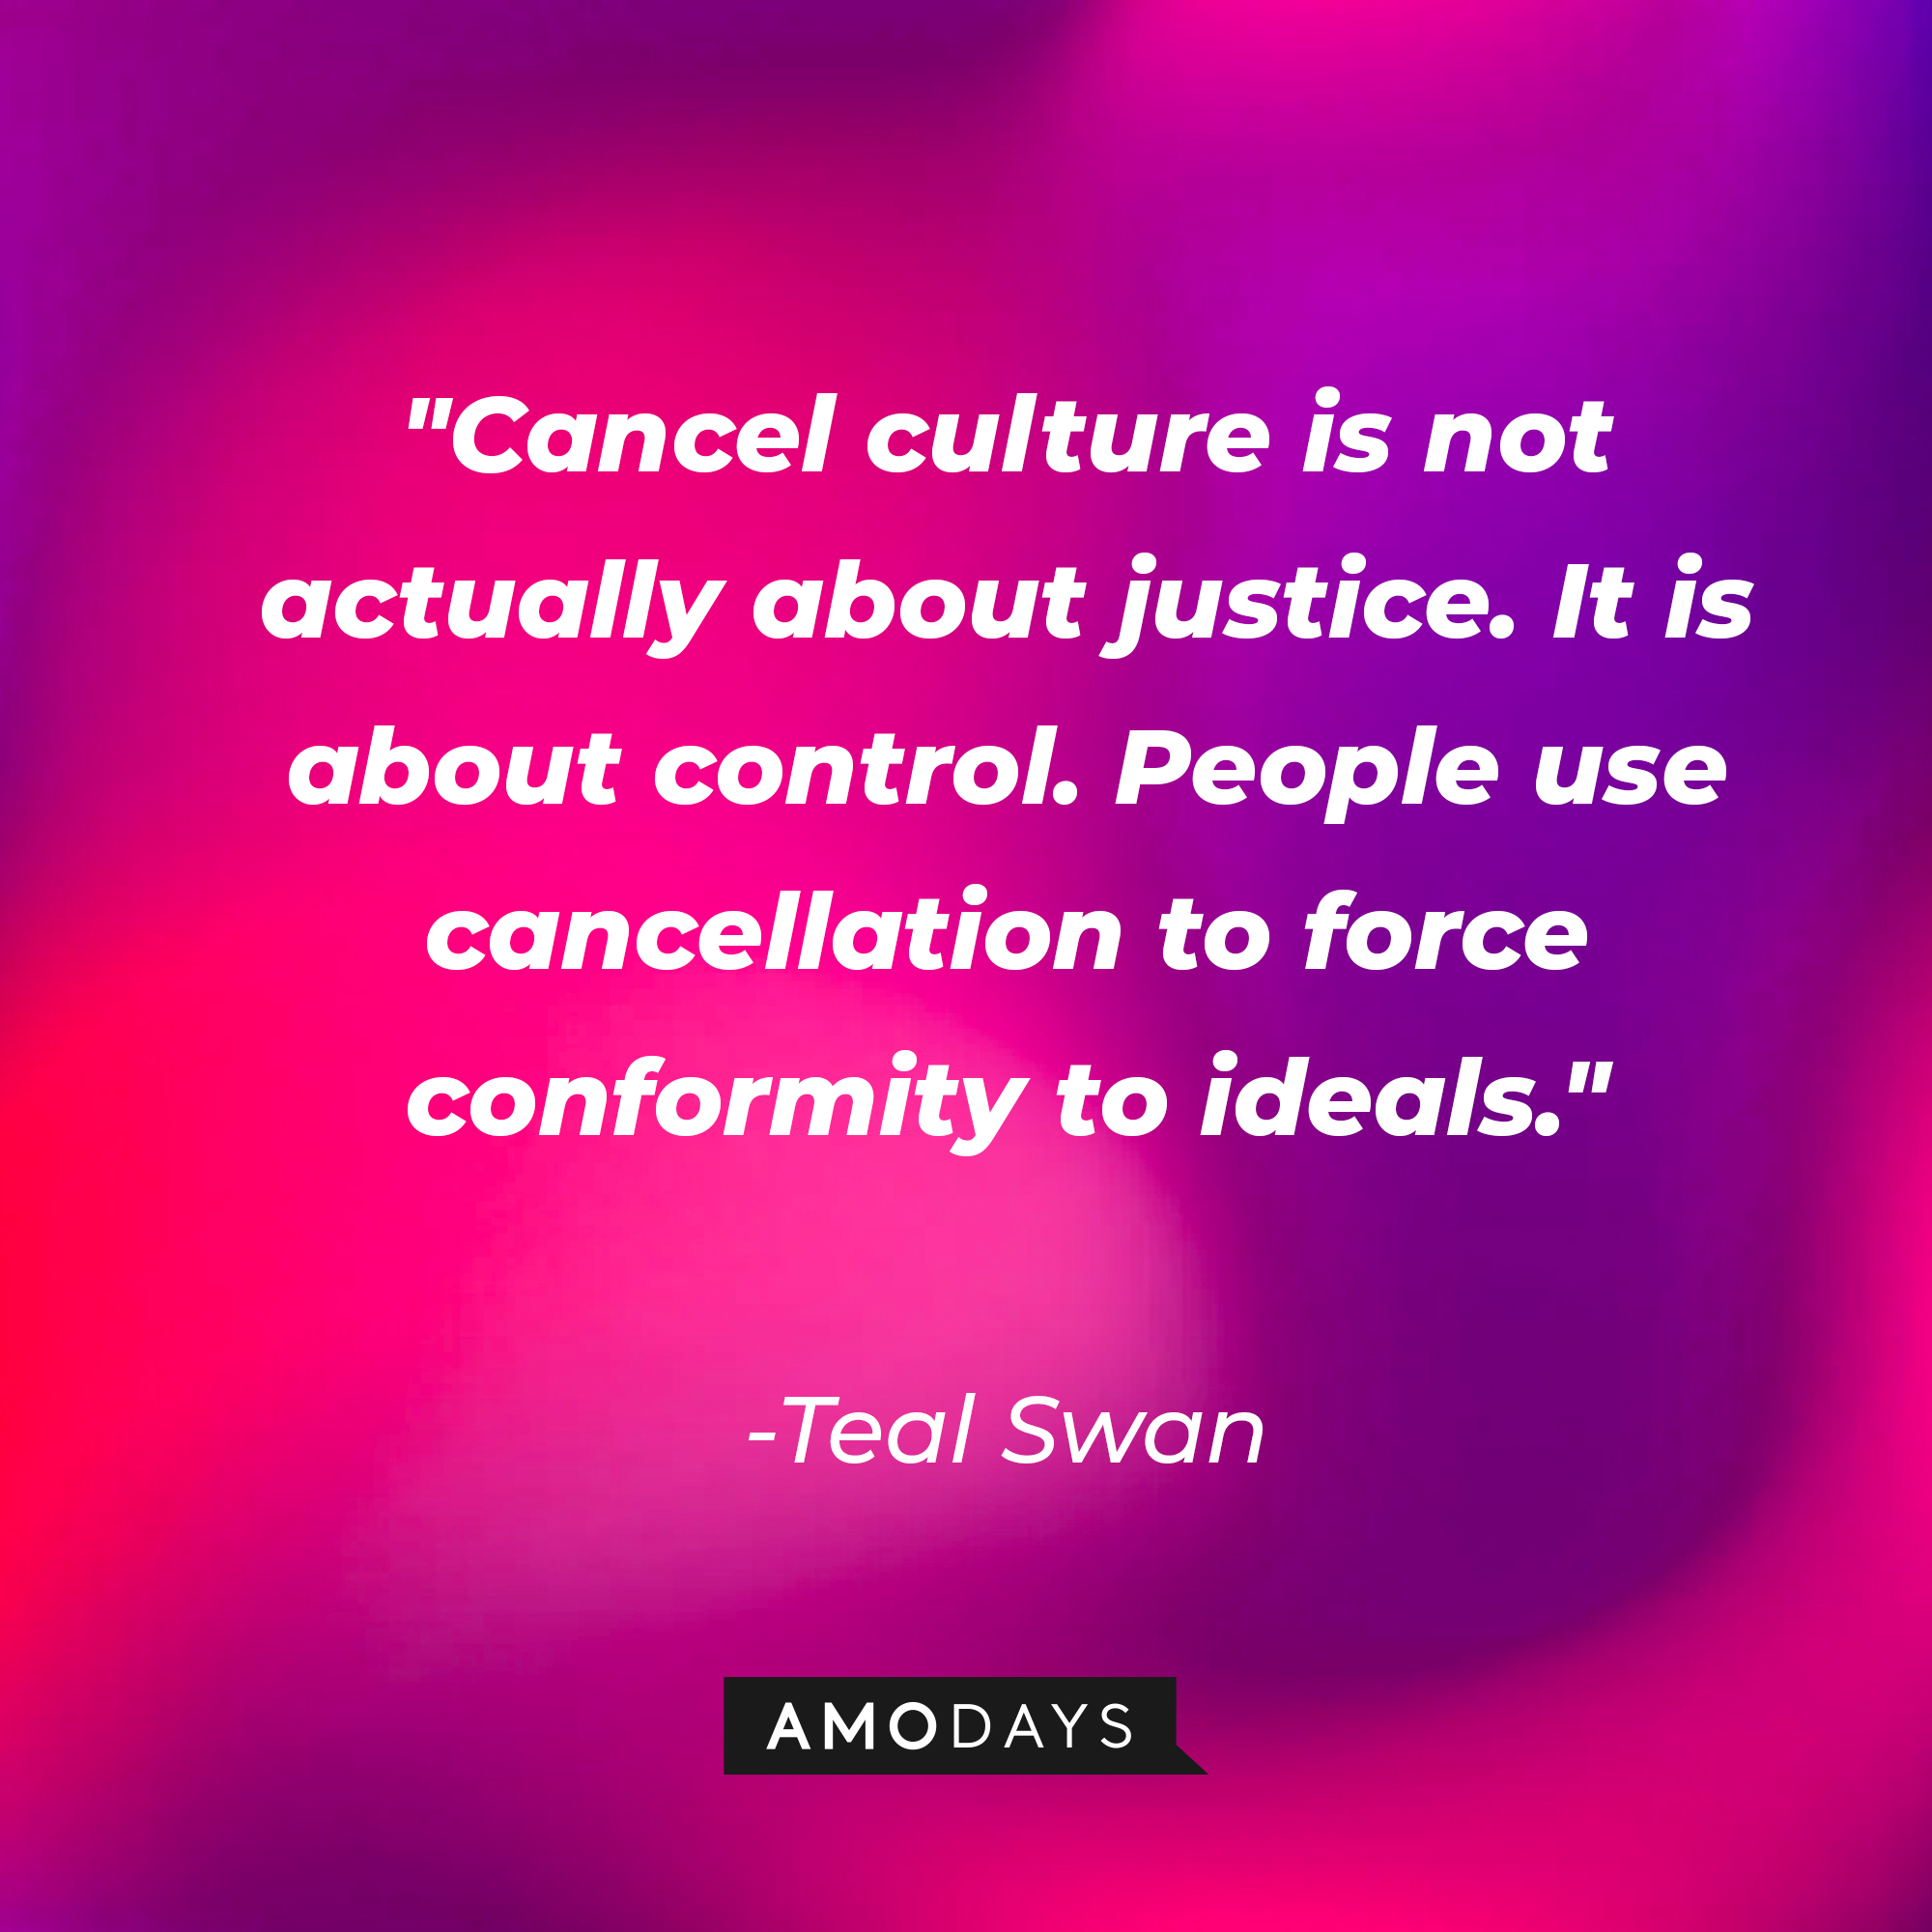 Teal Swan's quote: "Cancel culture is not actually about justice. It is about control. People use cancellation to force conformity to ideals." | Source: AmoDays